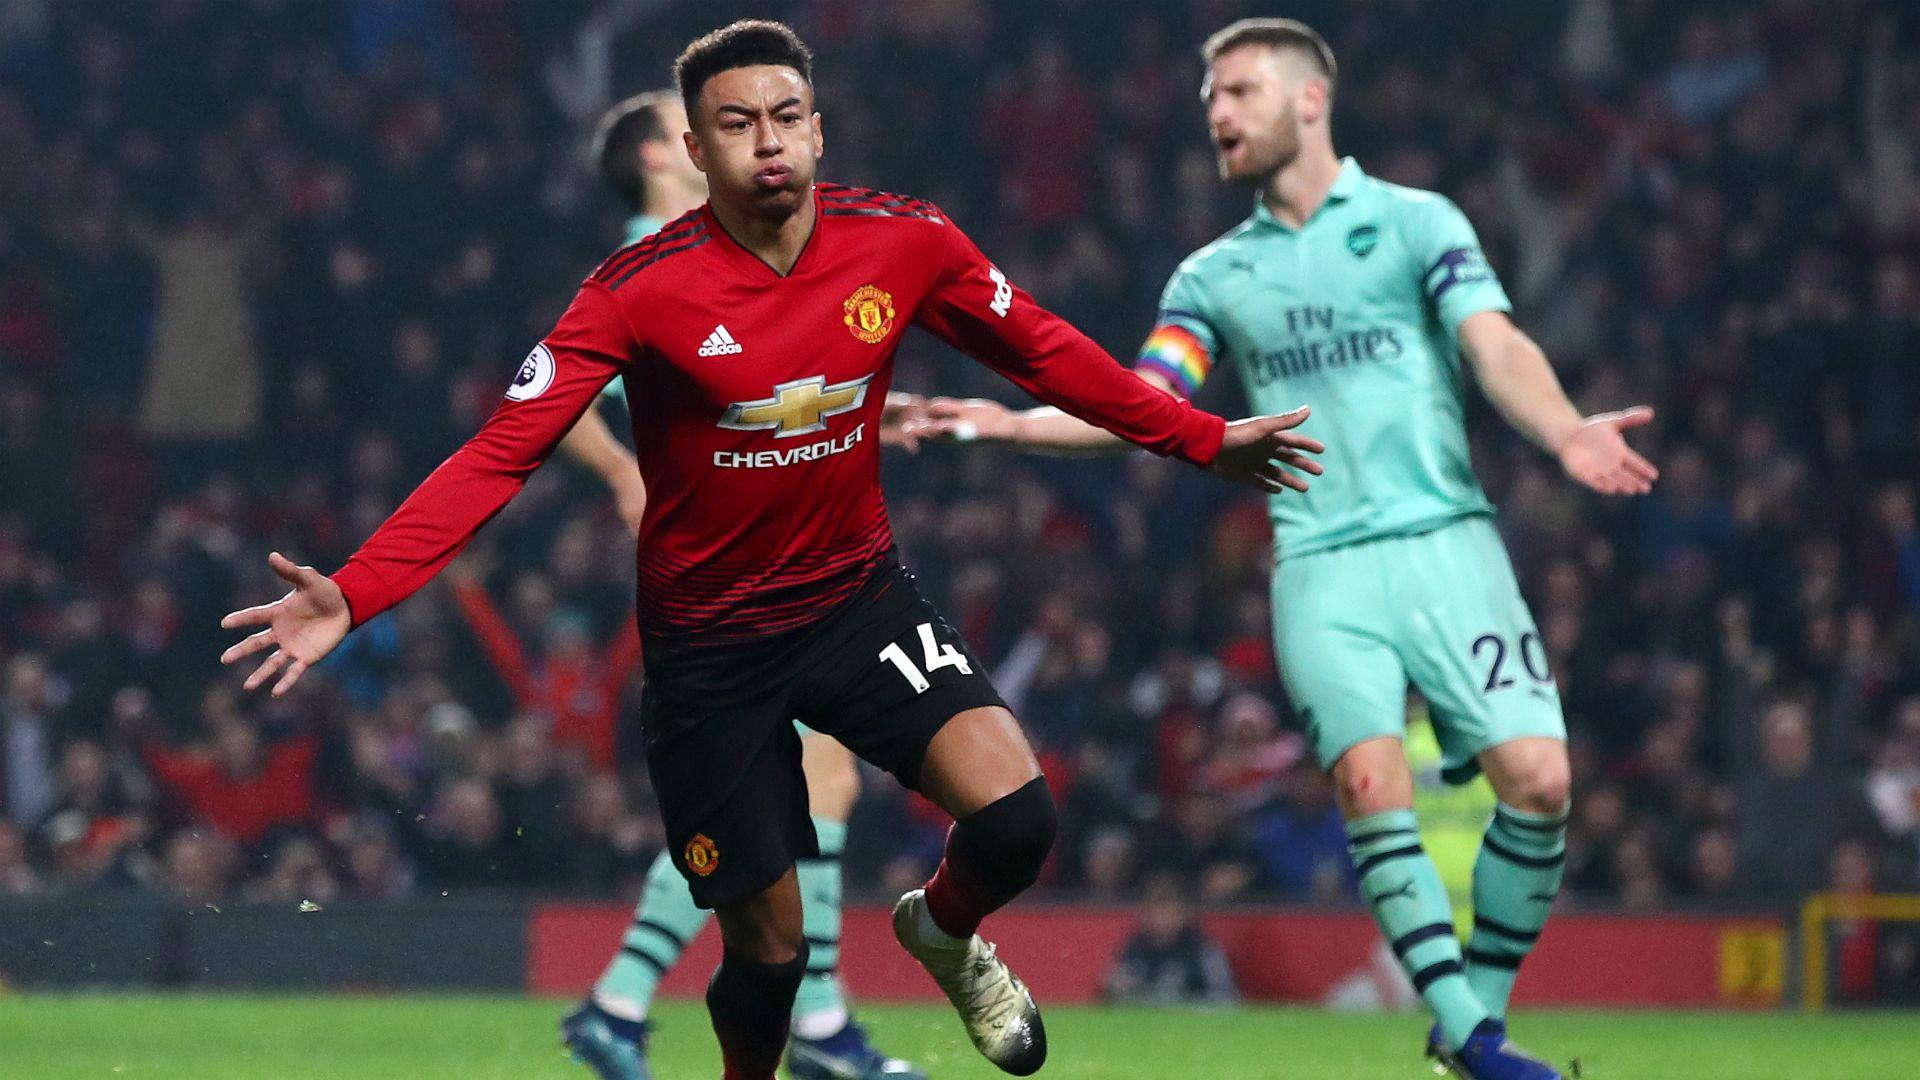 Manchester United 2 Arsenal 2: Lingard earns point but Red Devils